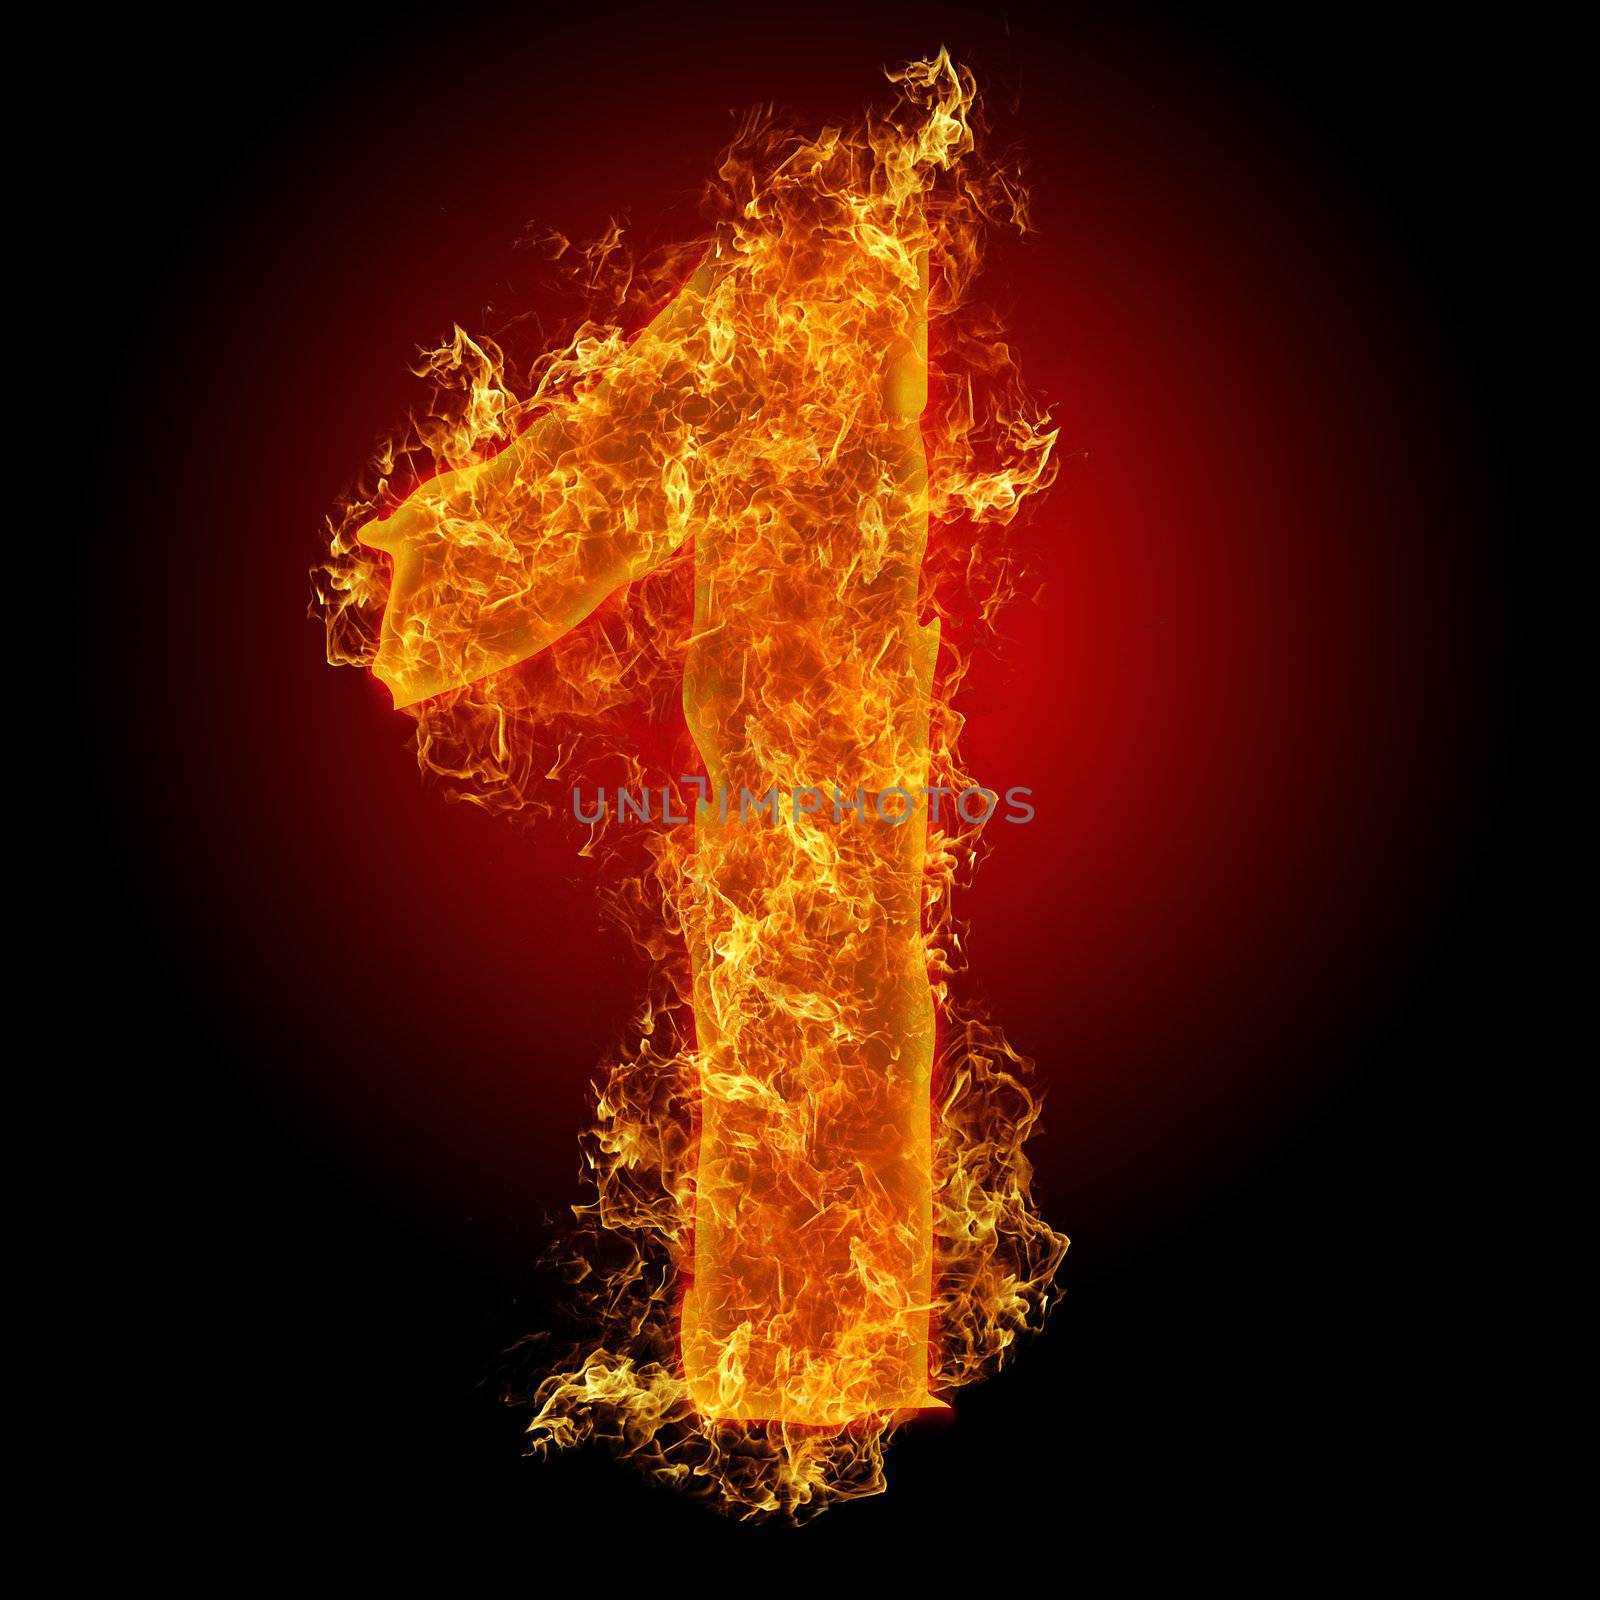 Fire number 1 on a black background